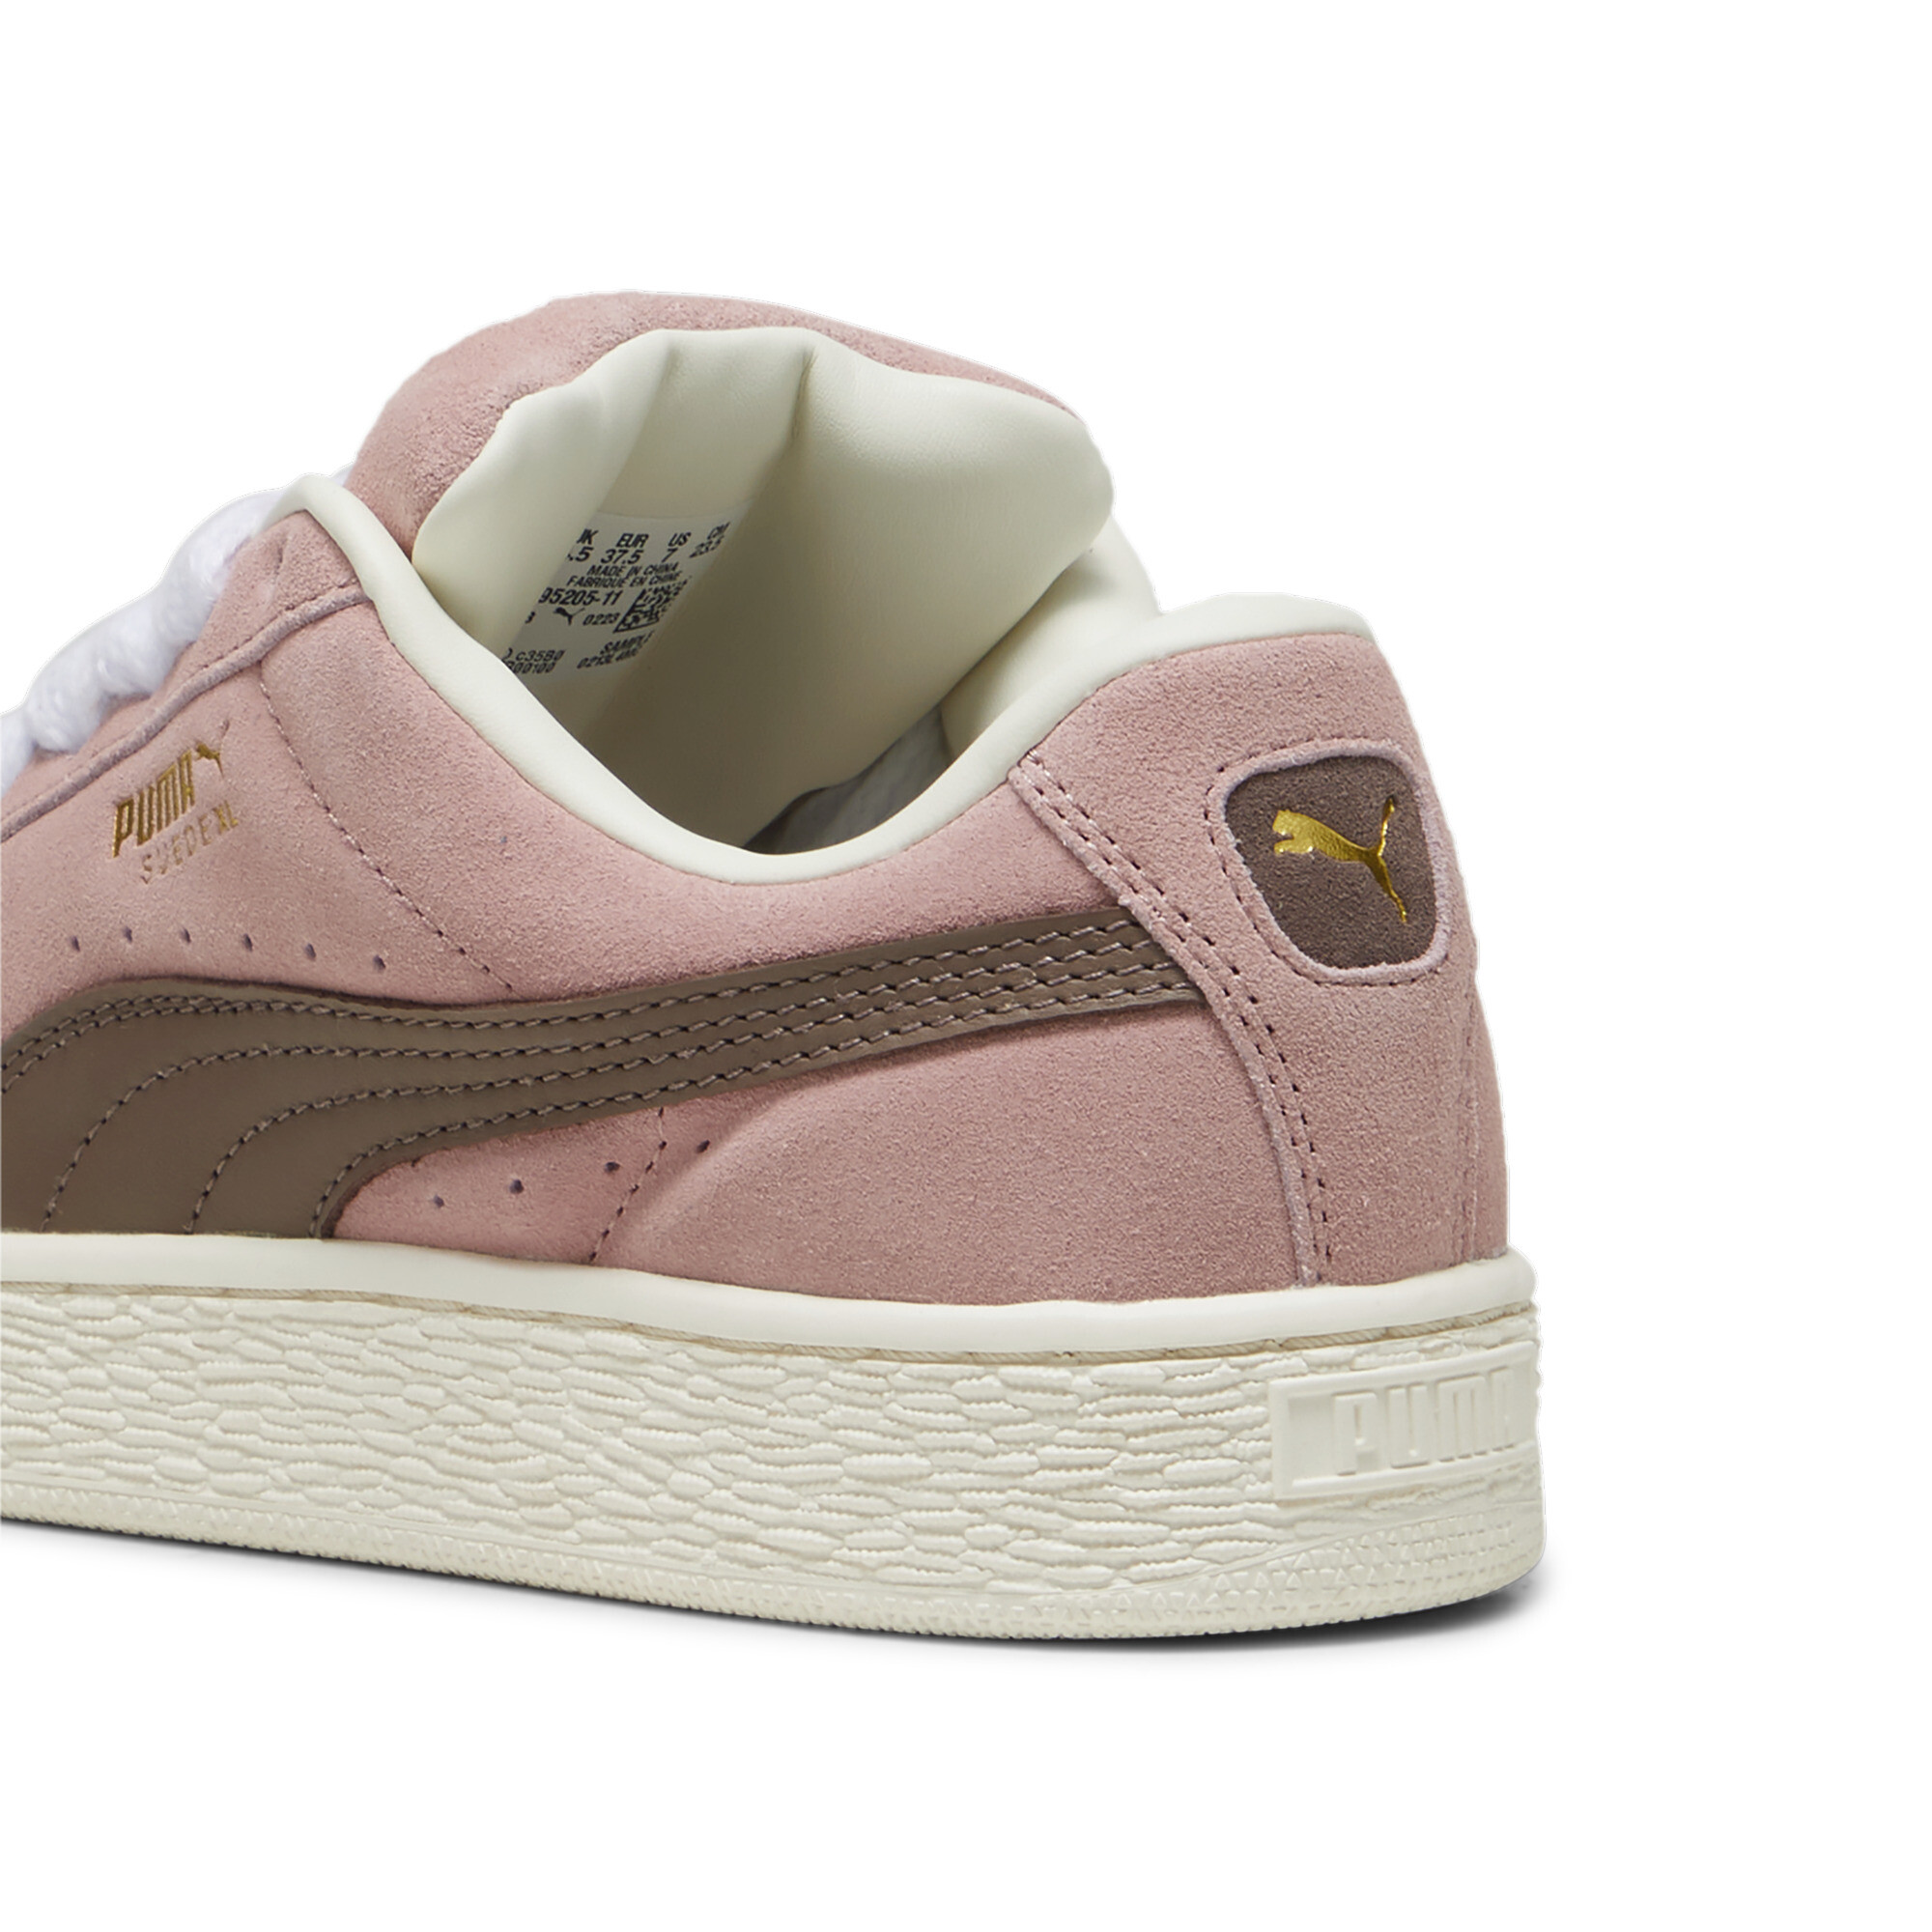 Puma Suede XL Sneakers Unisex, Pink, Size 40.5, Shoes